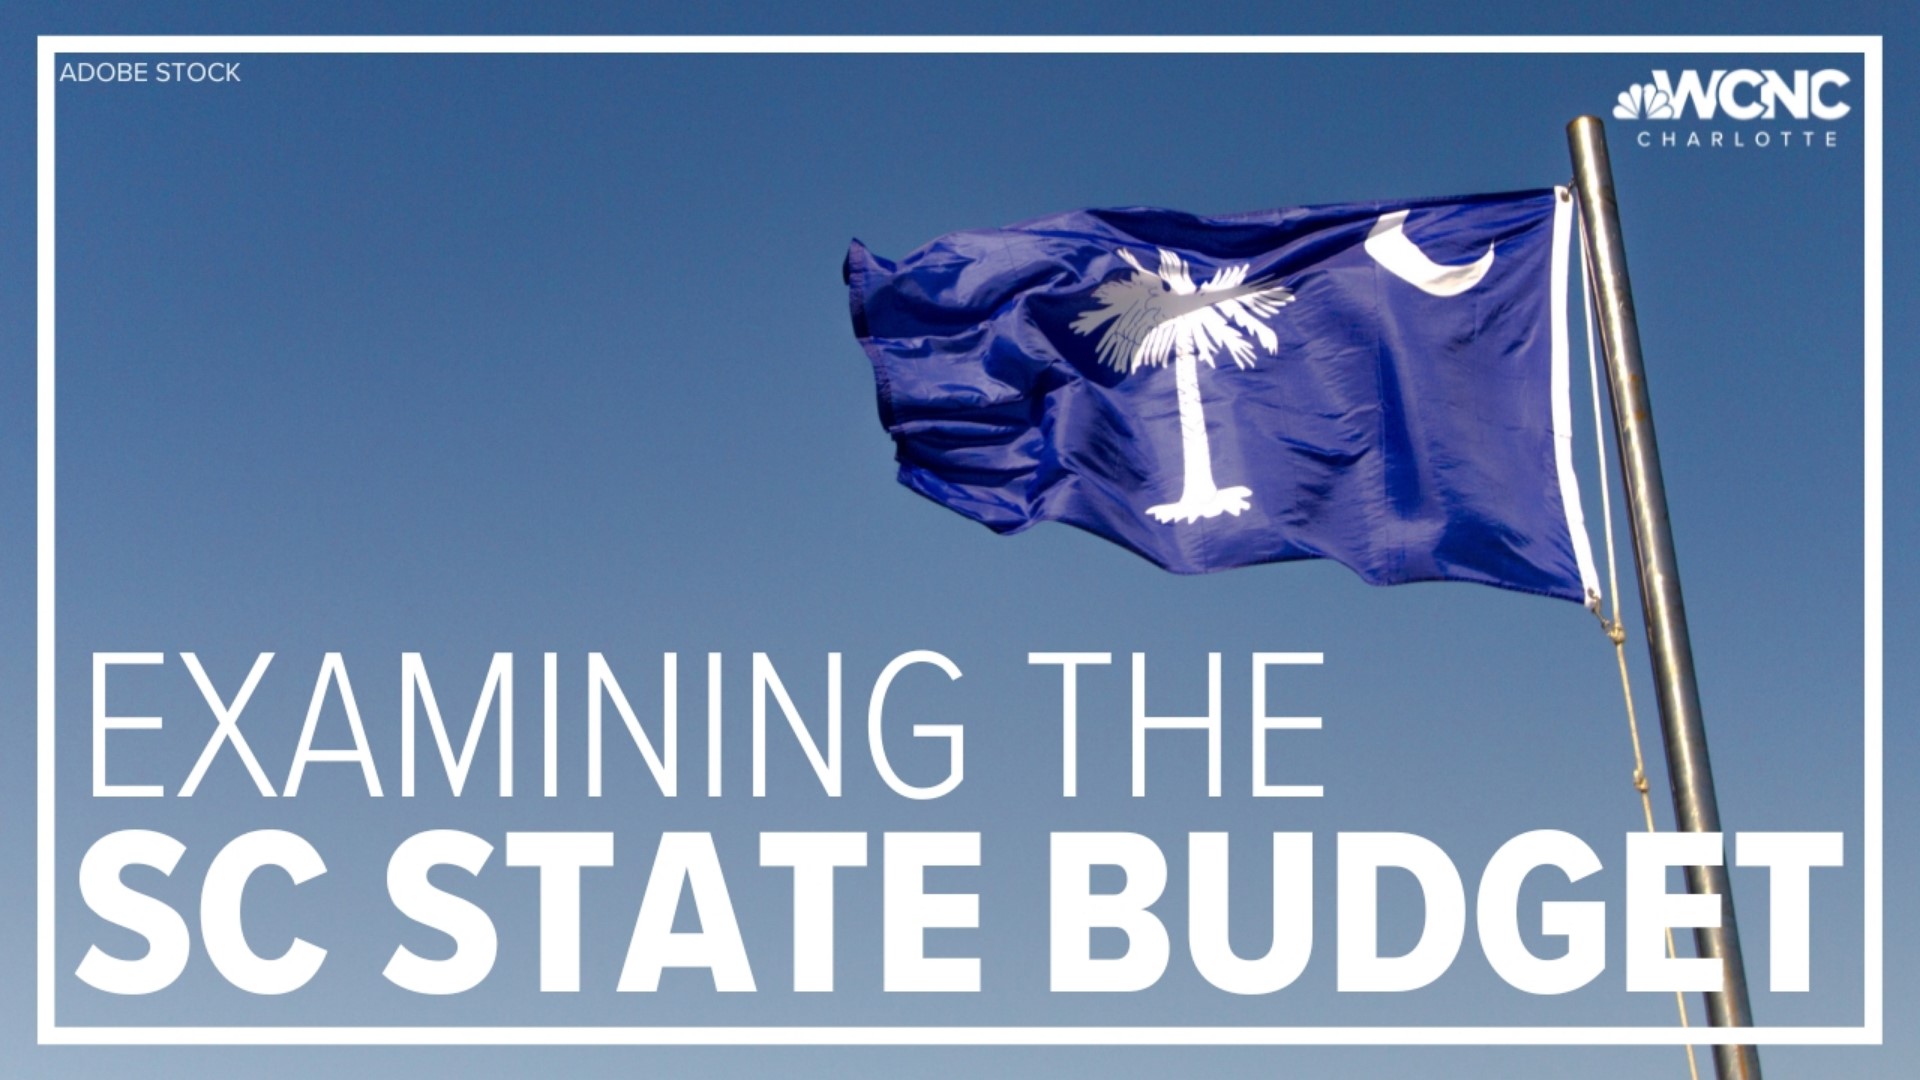 House lawmakers have given their okay for the state's nearly 14 billion dollar budget.